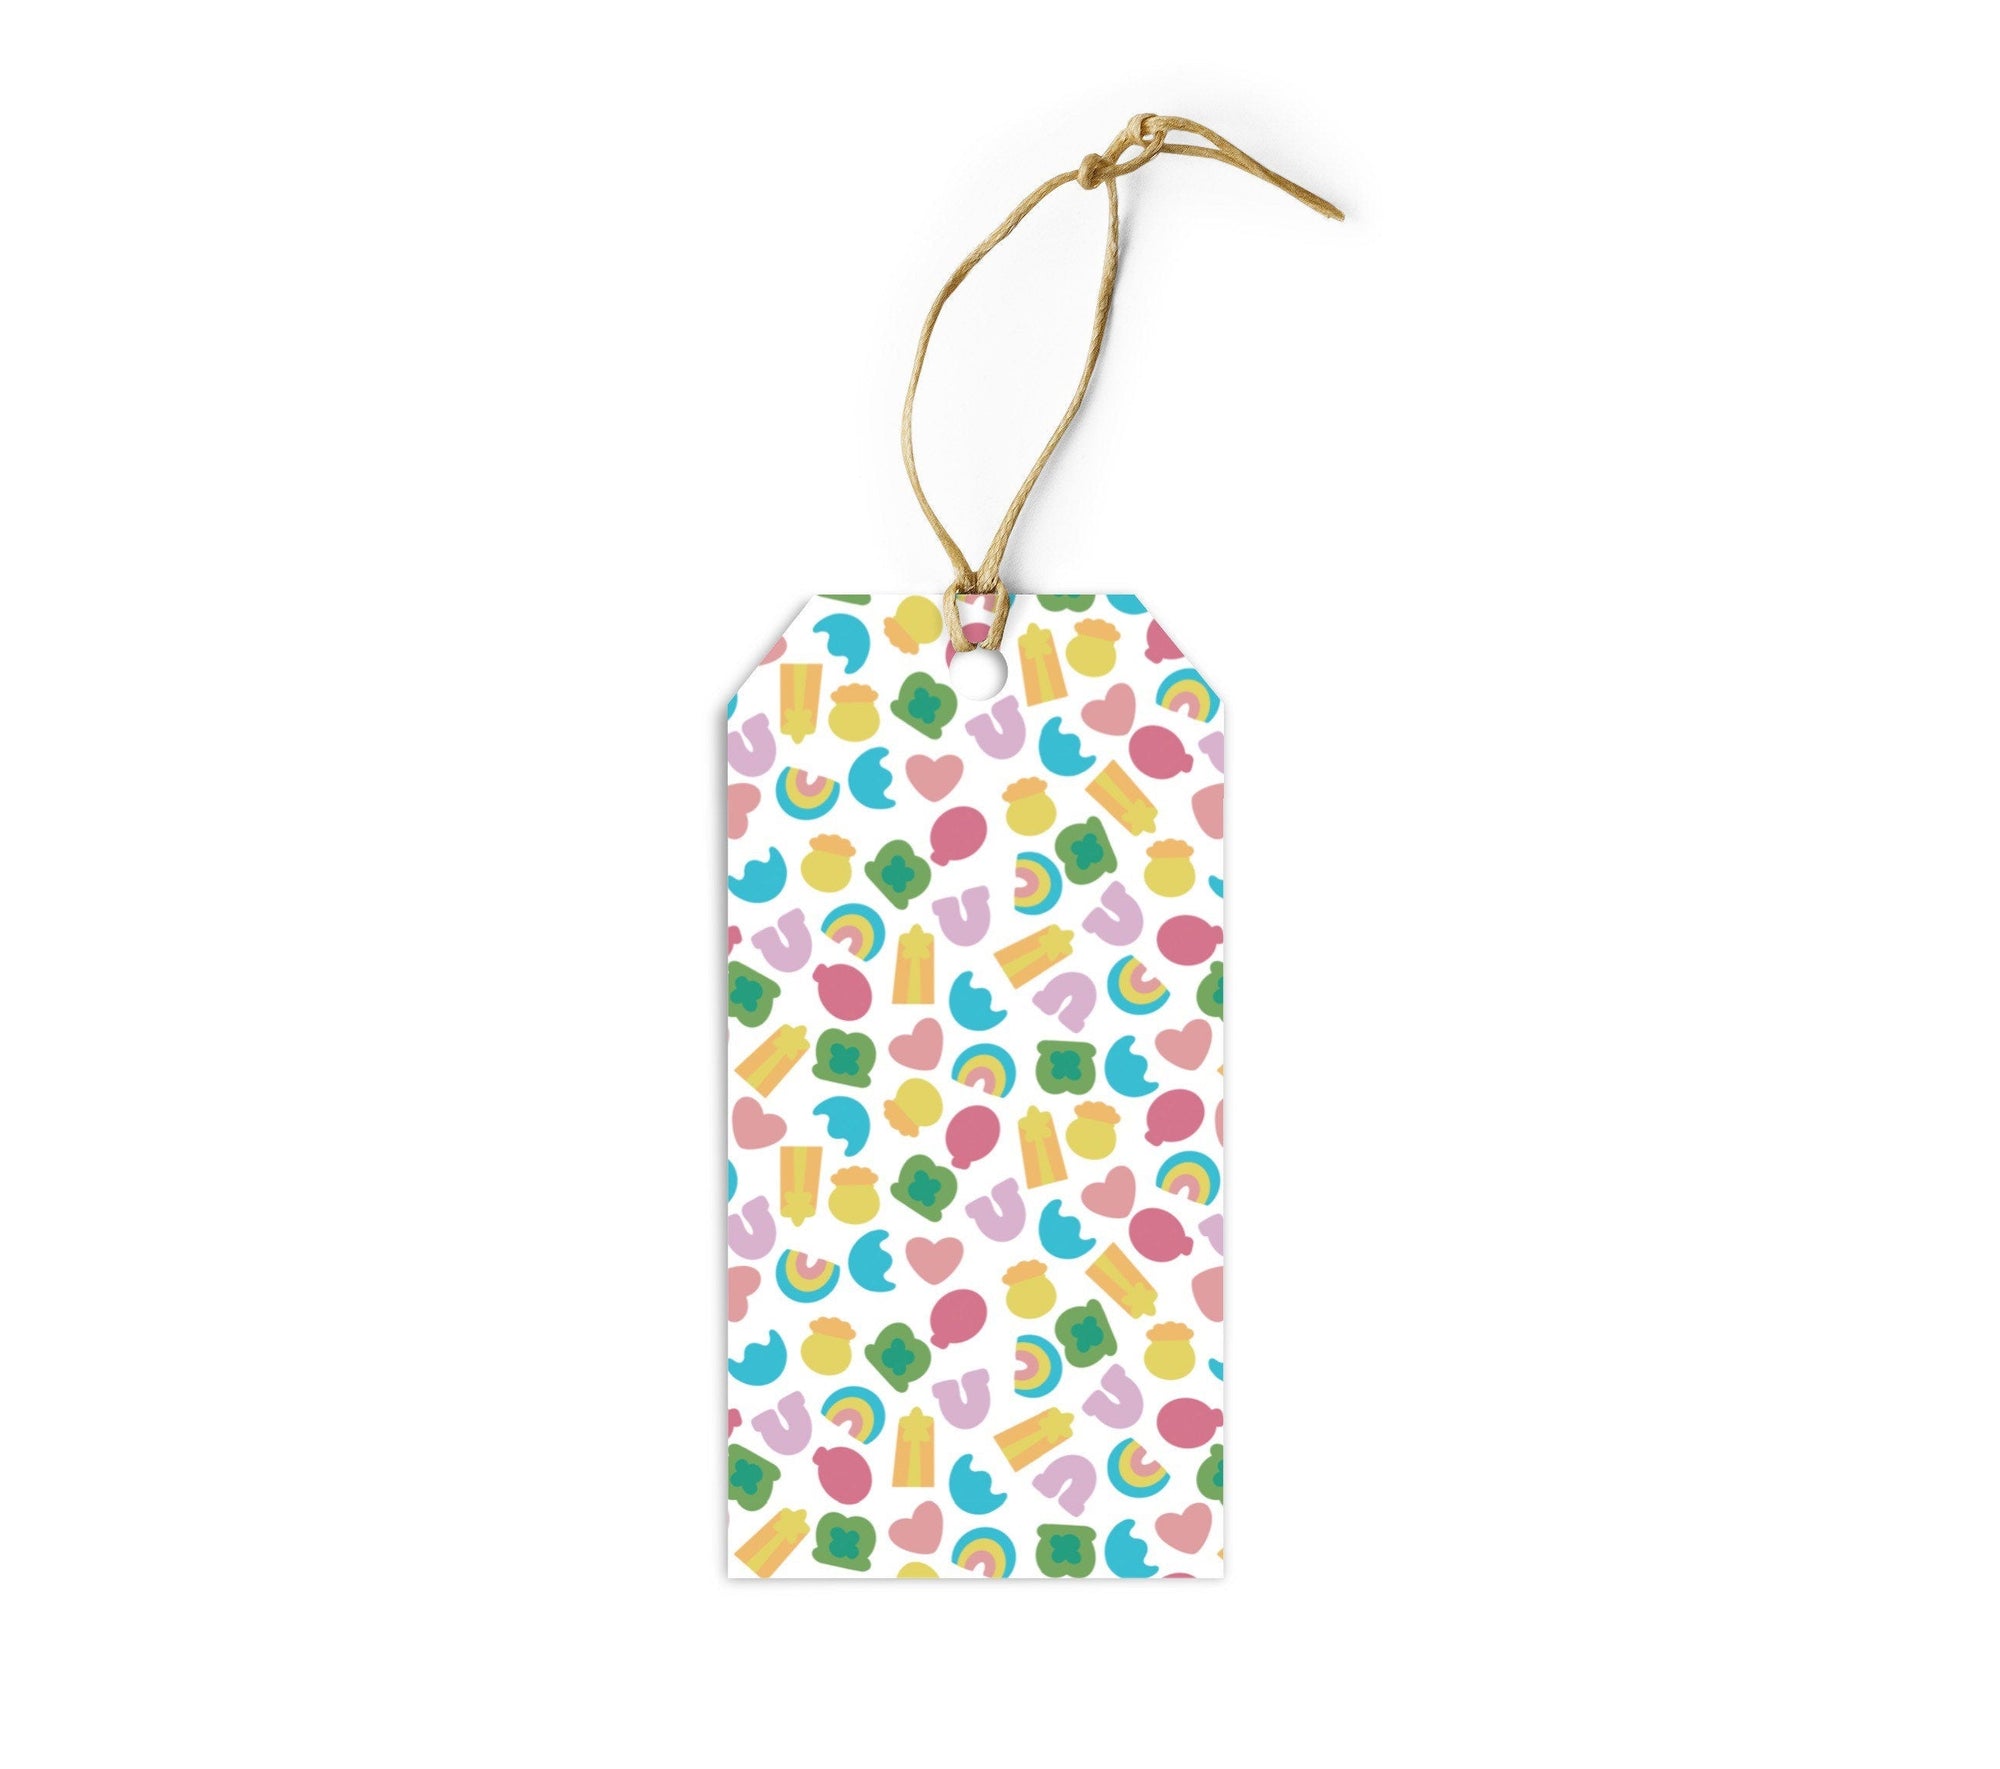 Lucky Charms Gift Tags - Set of 10 Gift Tags & Labels Violagrace-174 